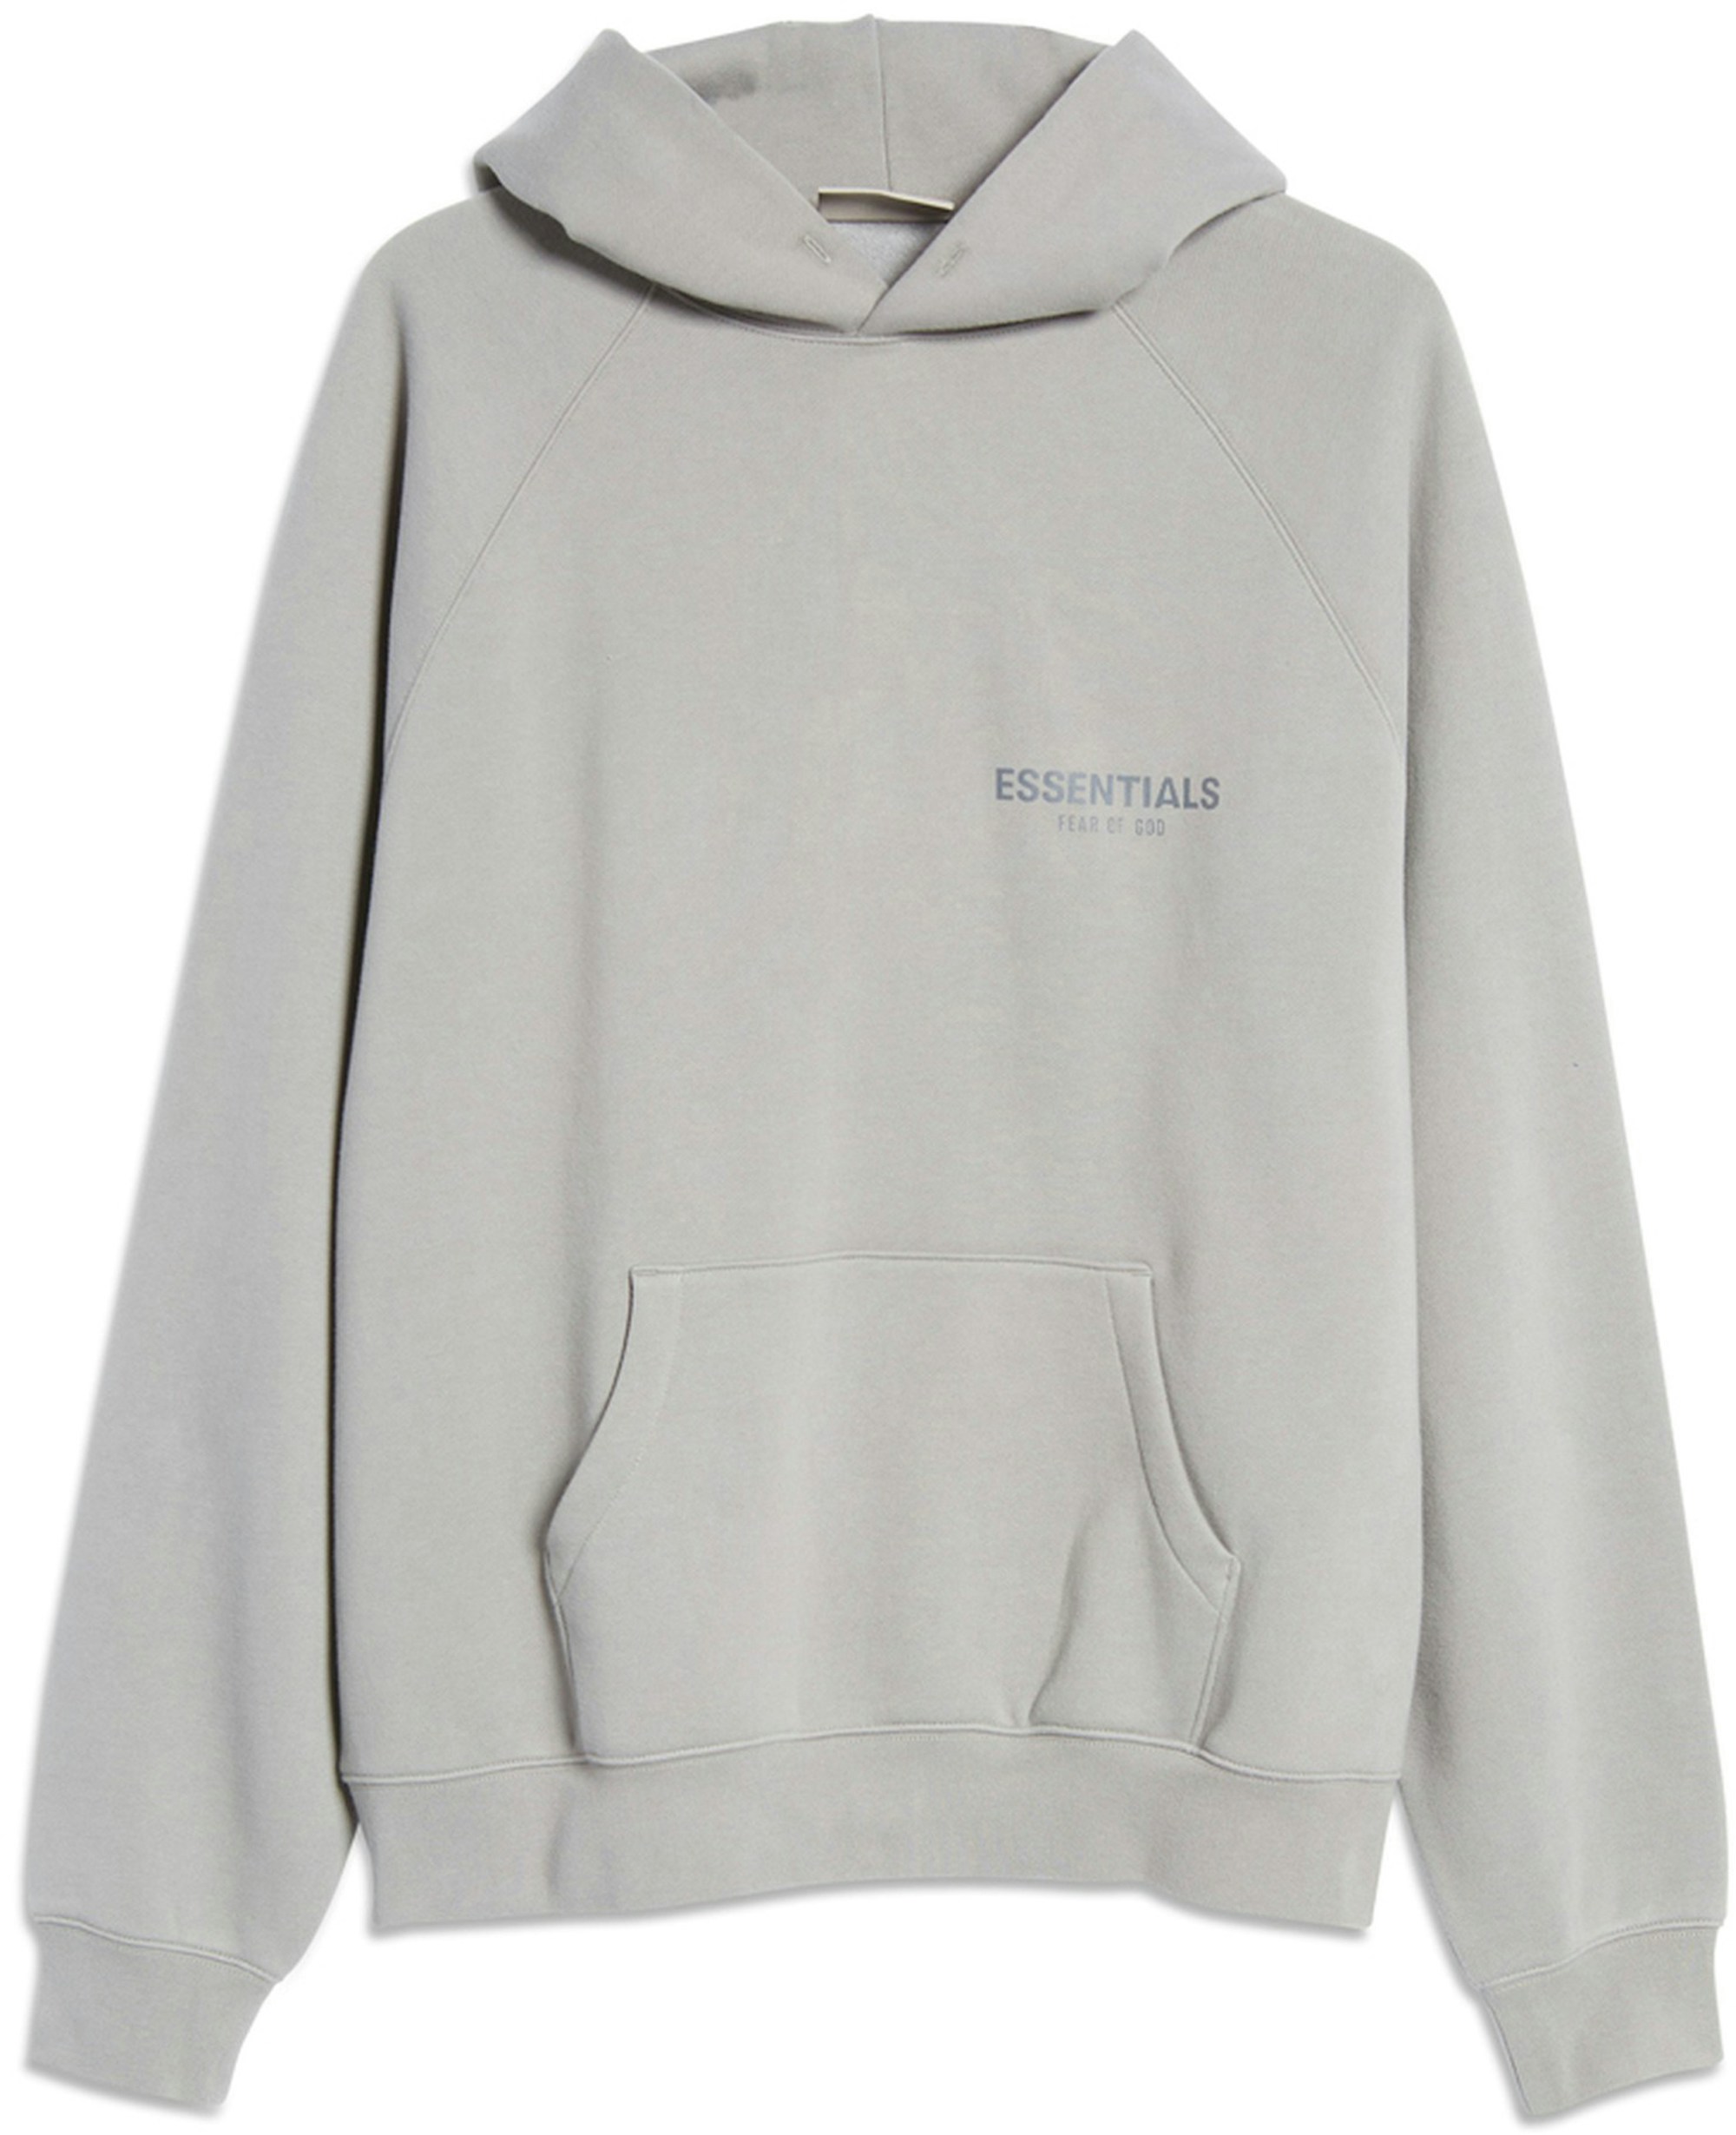 Fear of God Essentials Pullover Hoodie Cement/Pebble - SS21